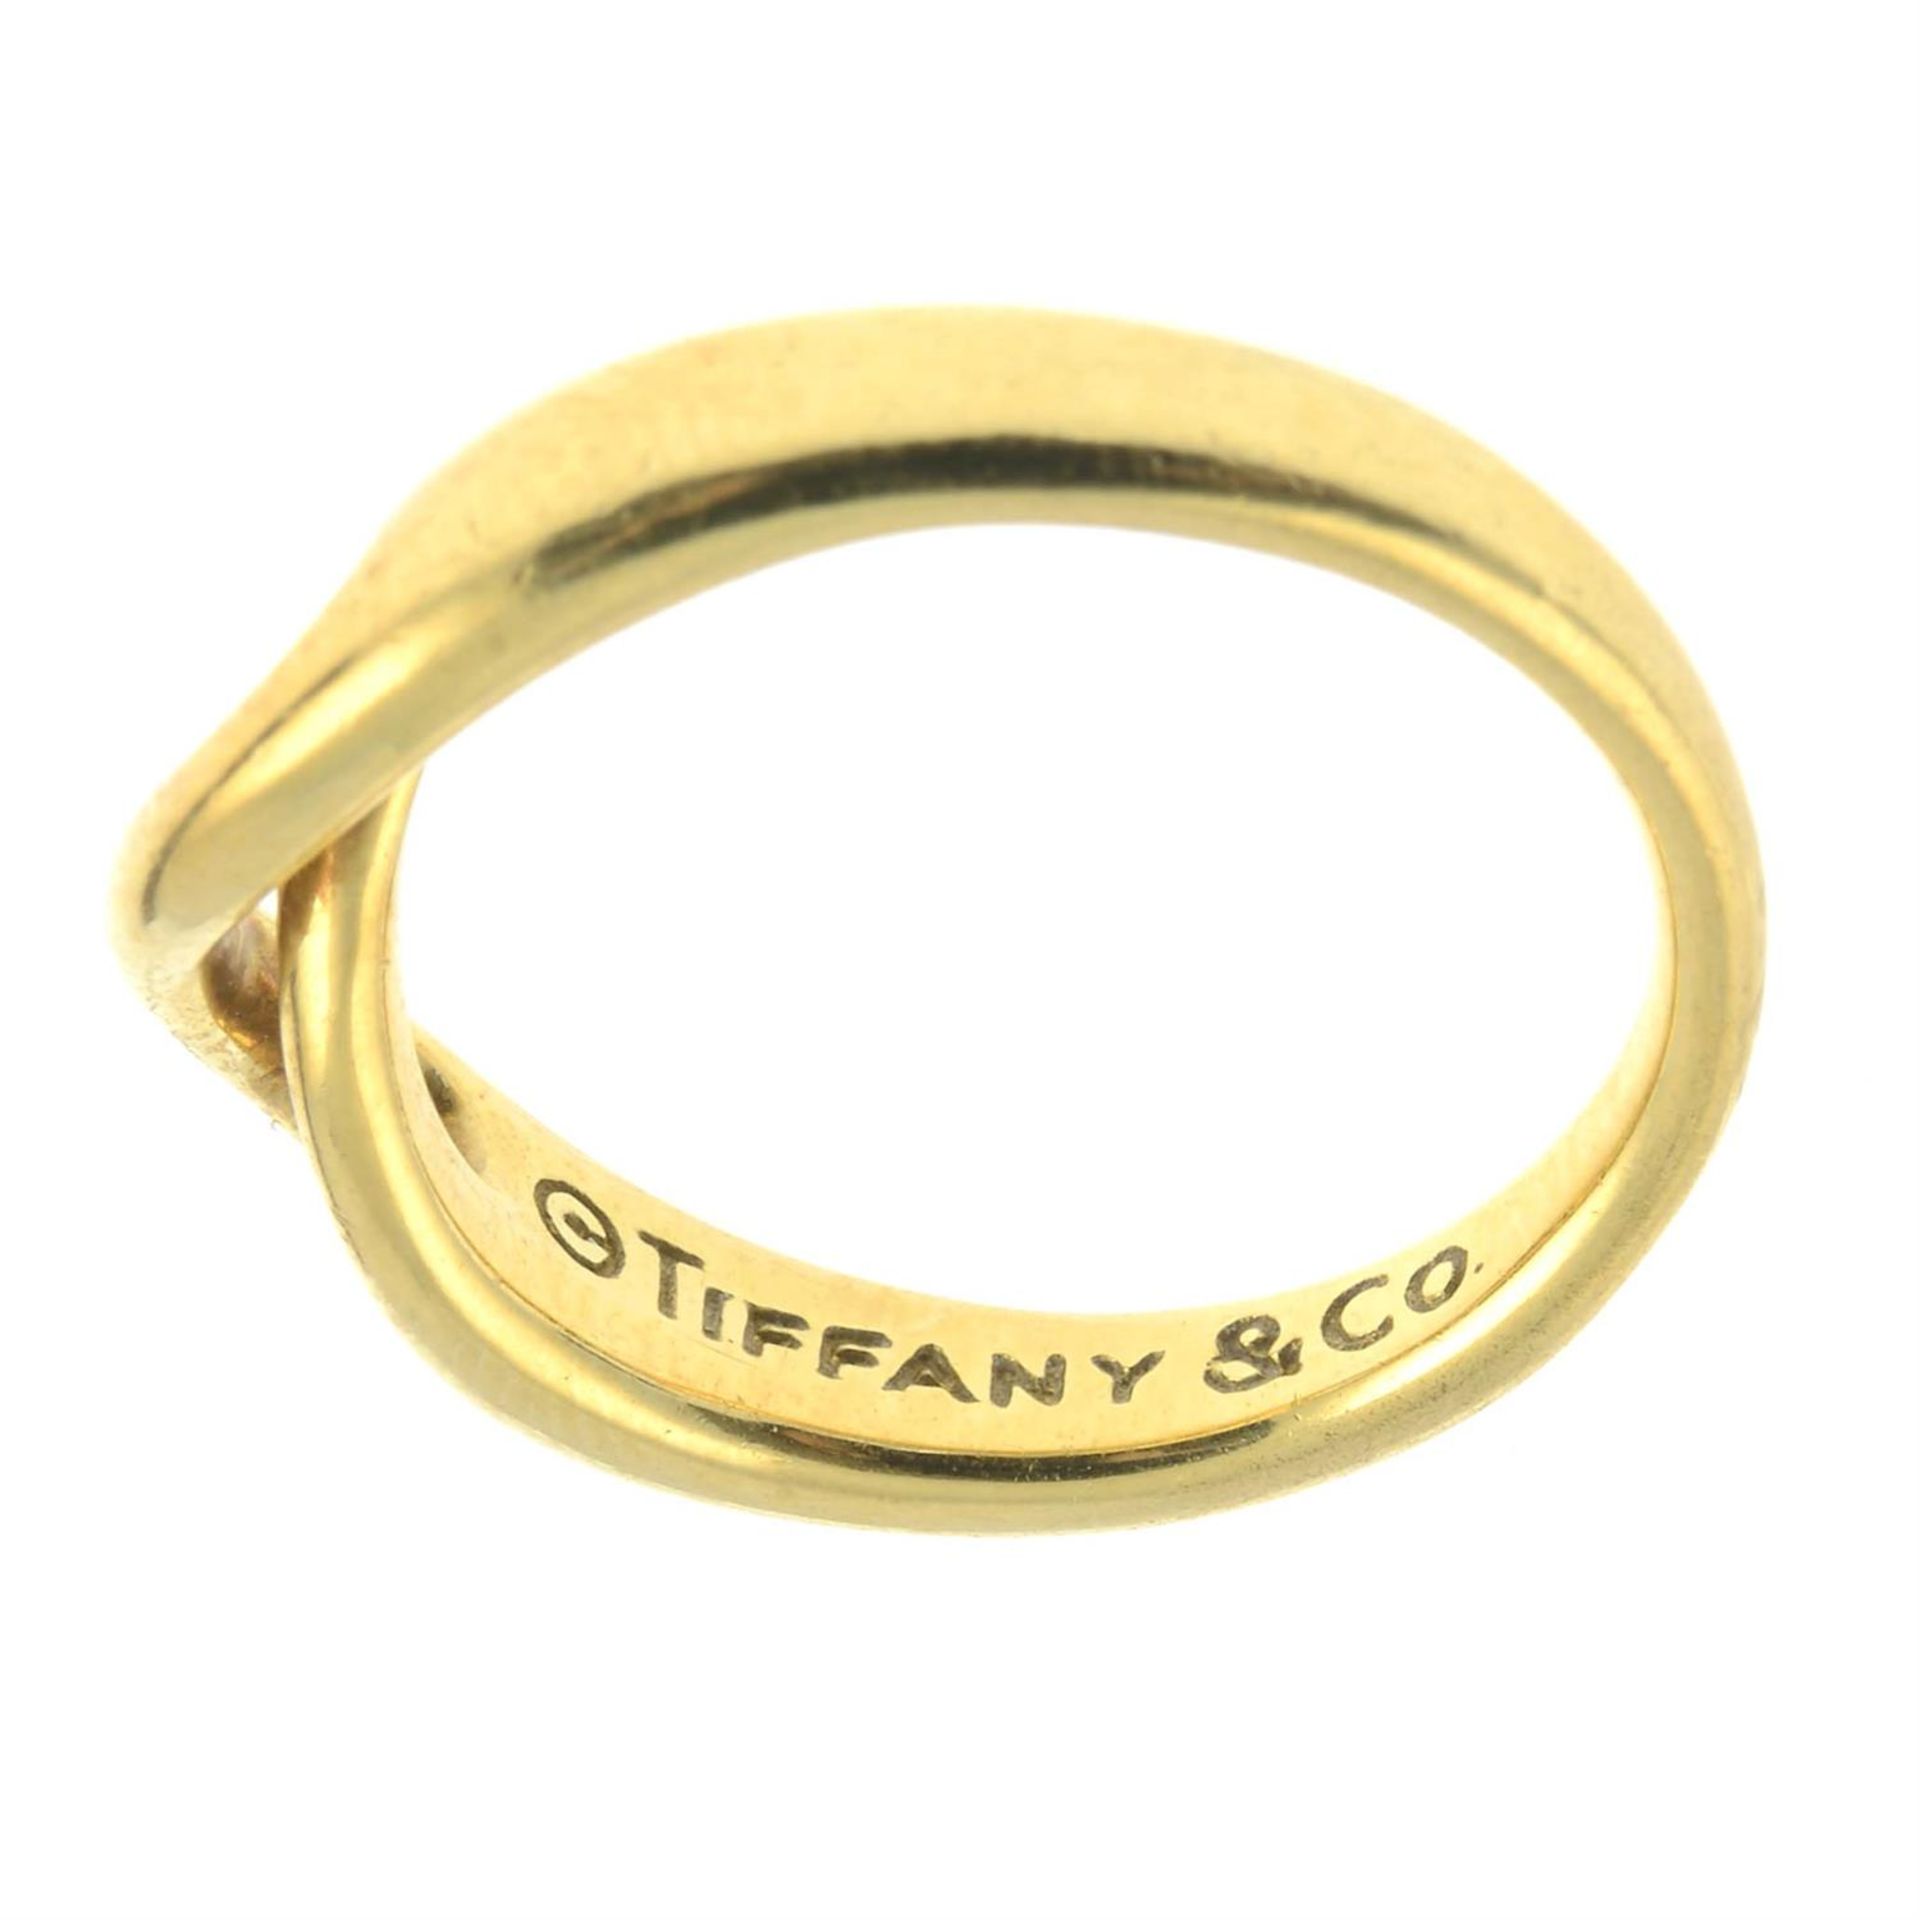 A dress ring, by Tiffany & Co. - Image 2 of 2